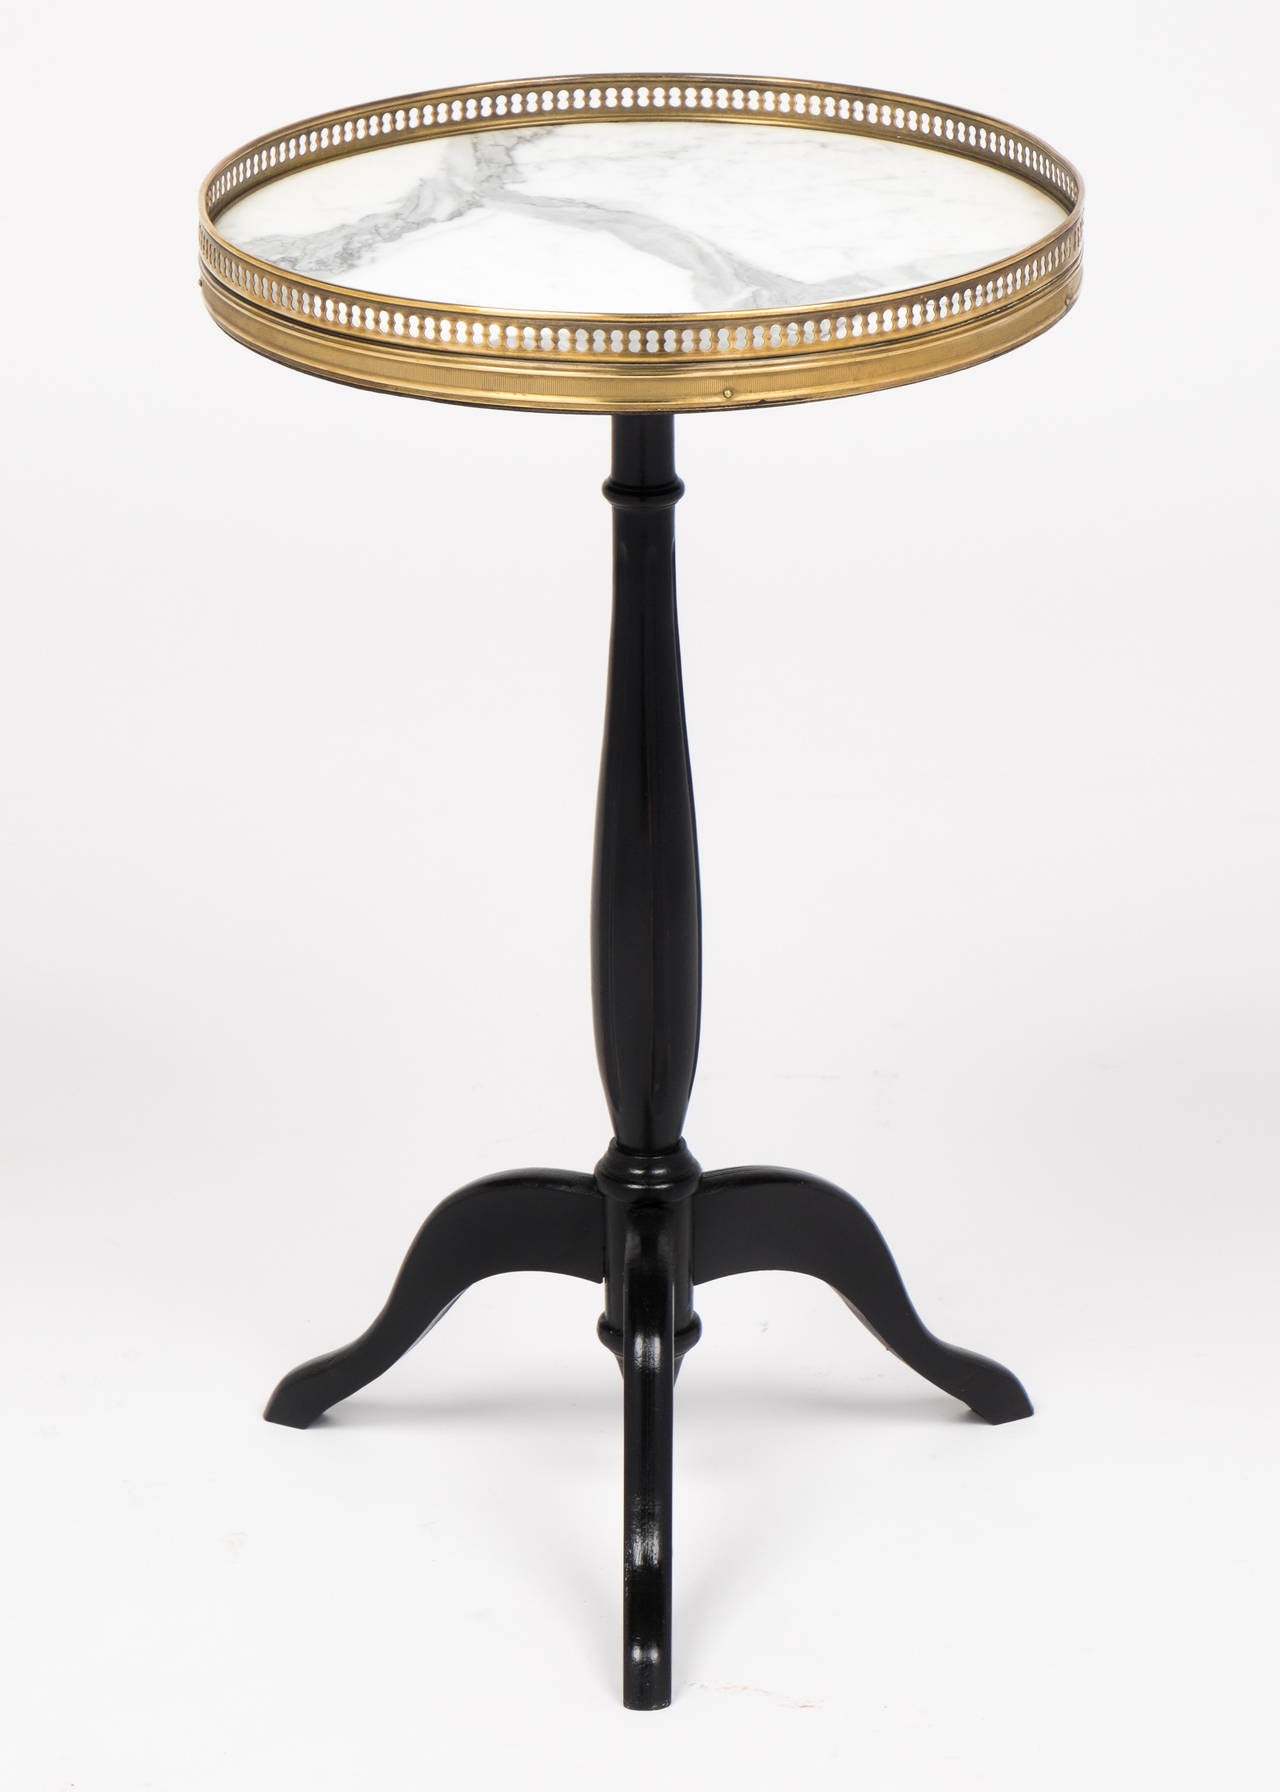 Early 20th Century Louis XVI Marble-Top Tripod Side Table